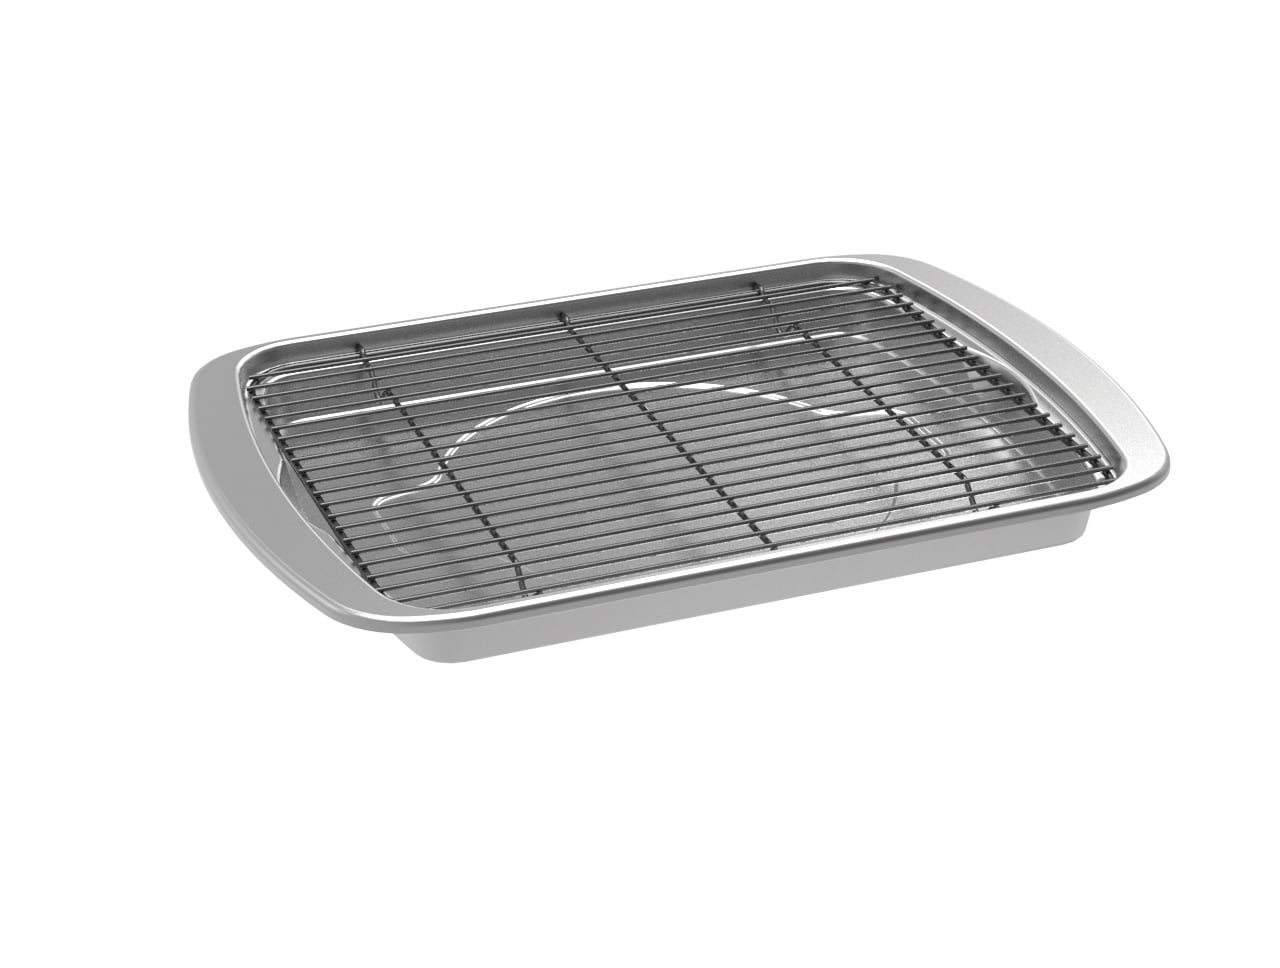 Nordic Ware Aluminum Oven Bacon Pan with Nesting Rack, 11.6" x 15.6" x 1.6"